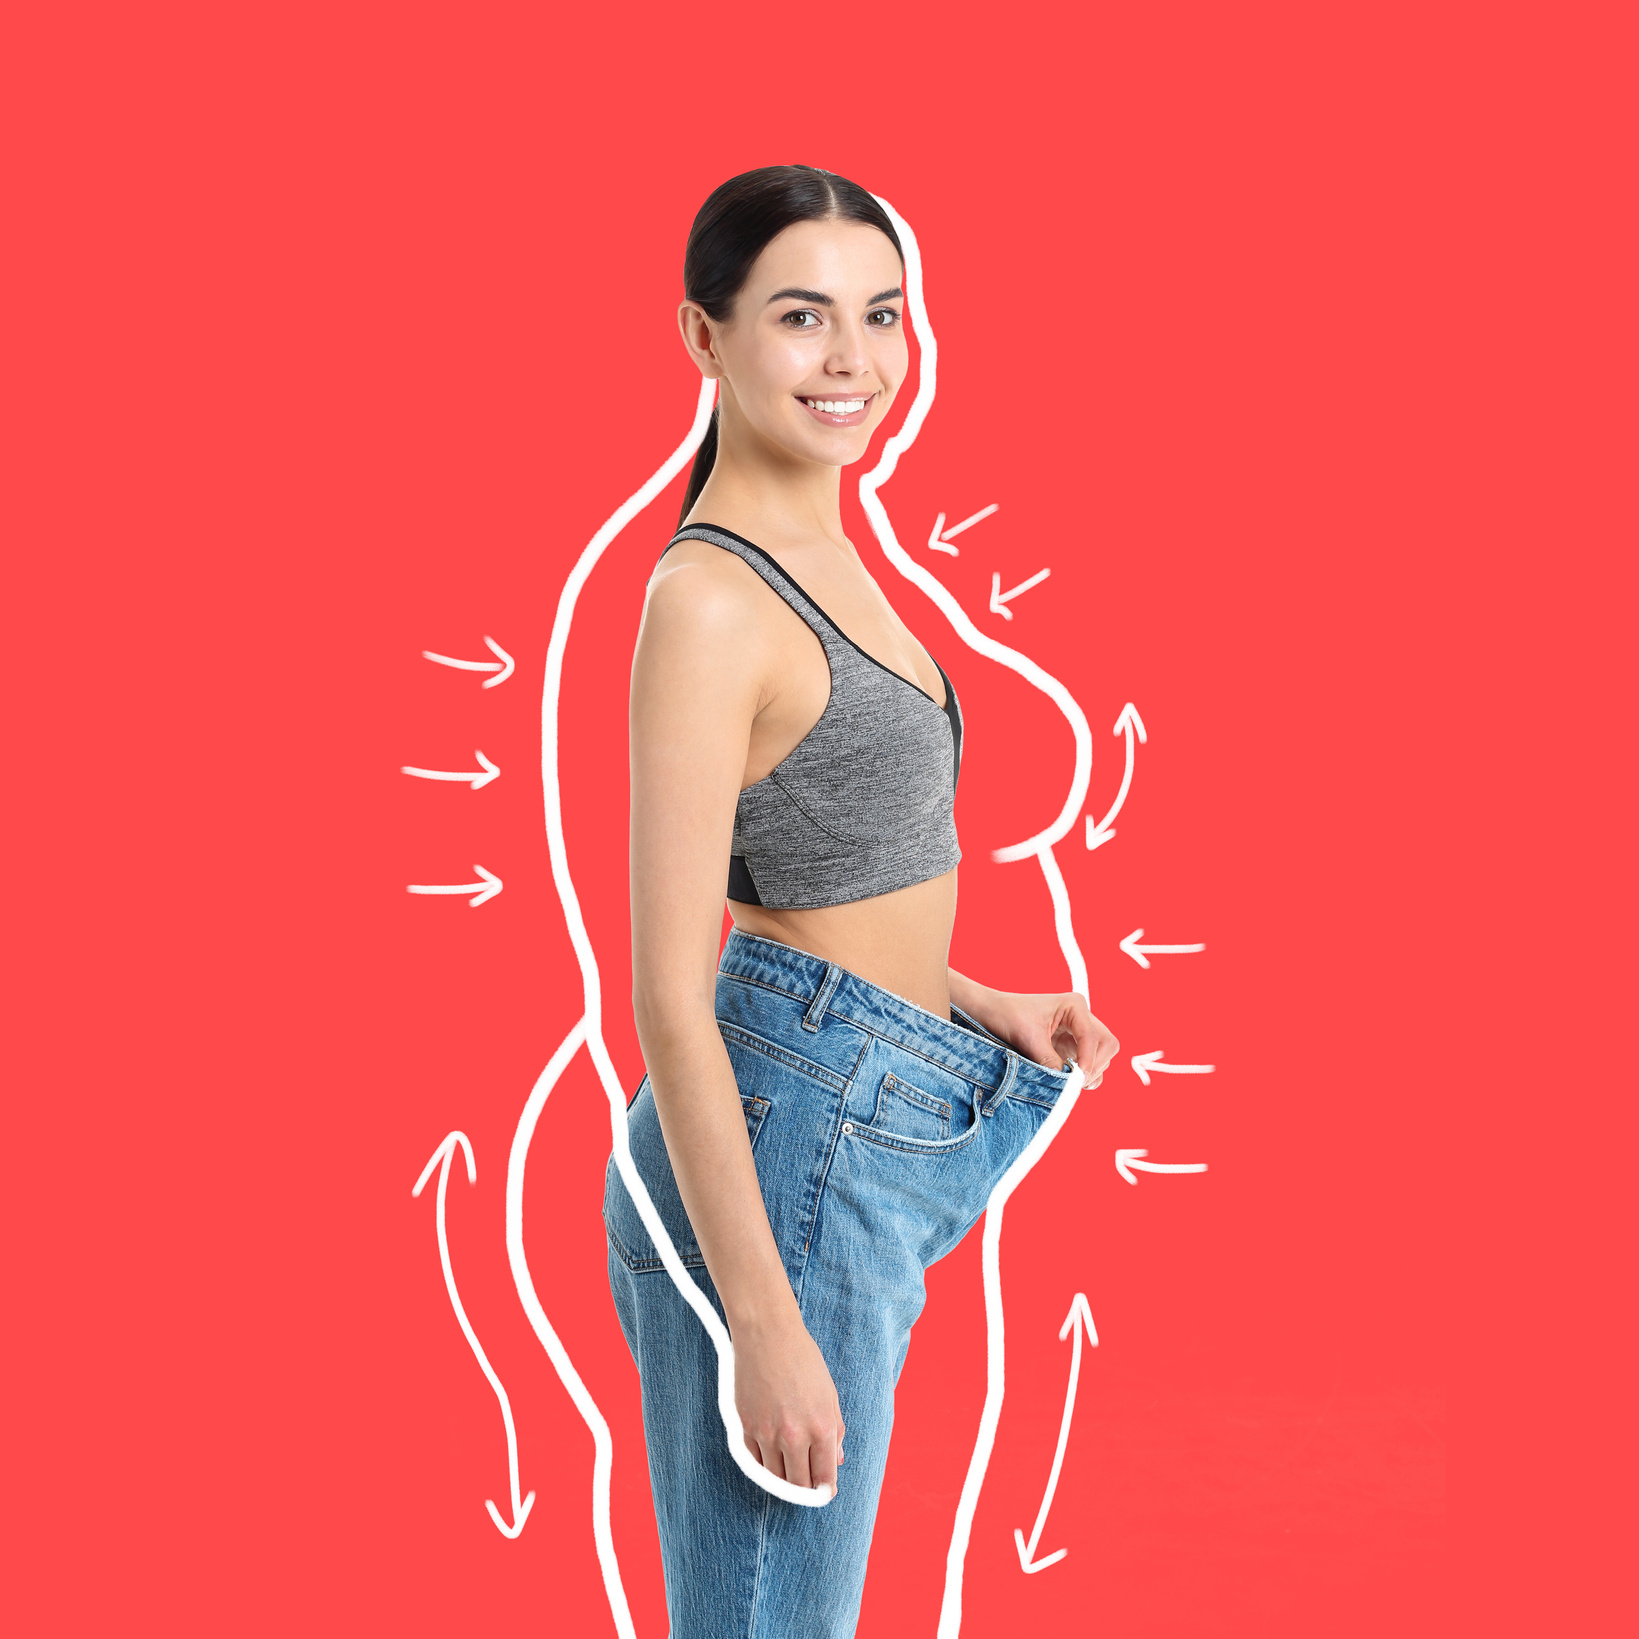 Portrait of Fit Woman with Weight Loss on Red Background